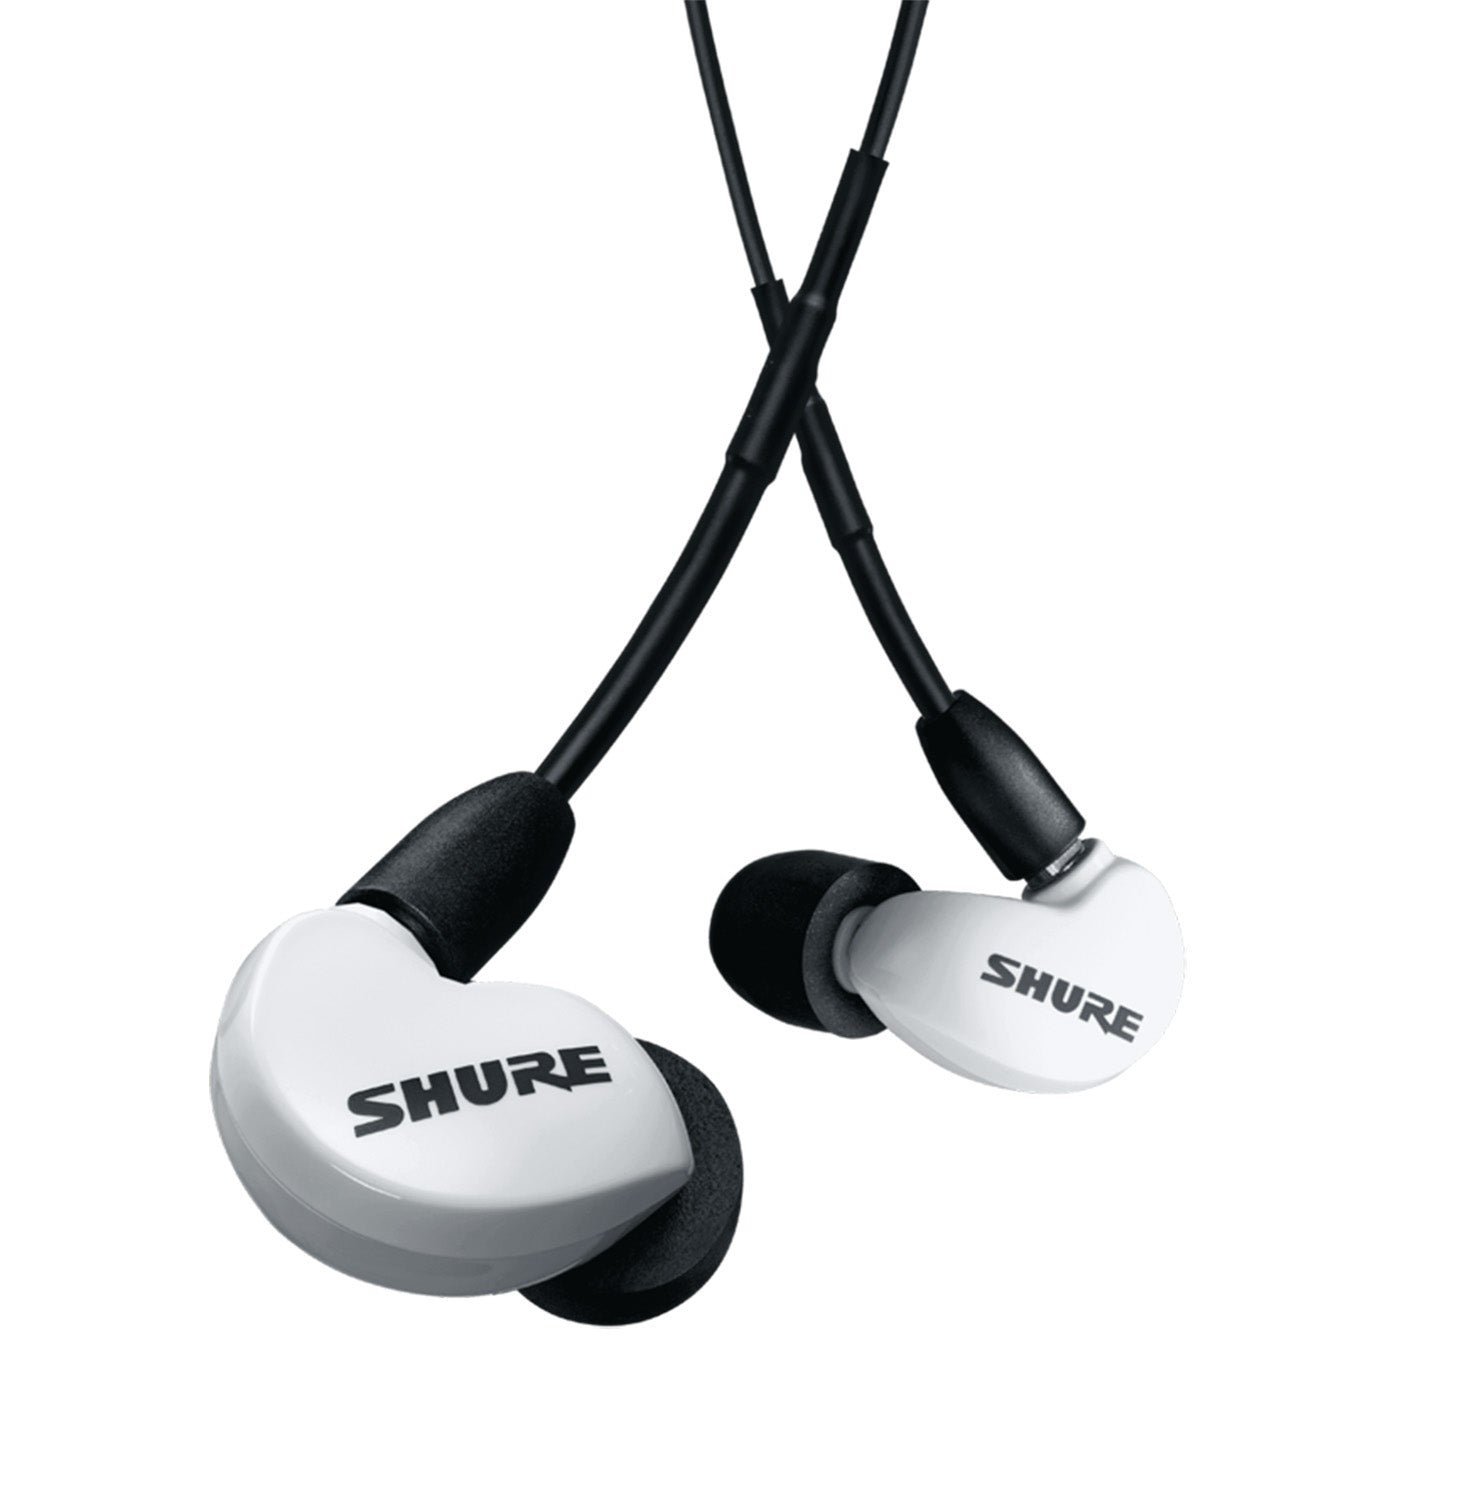 B-Stock: Shure SE215SPE-W+UNI White Special Edition Isolating Earphones With Universal 3.5 mm Remote and Mic Cable - Hollywood DJ